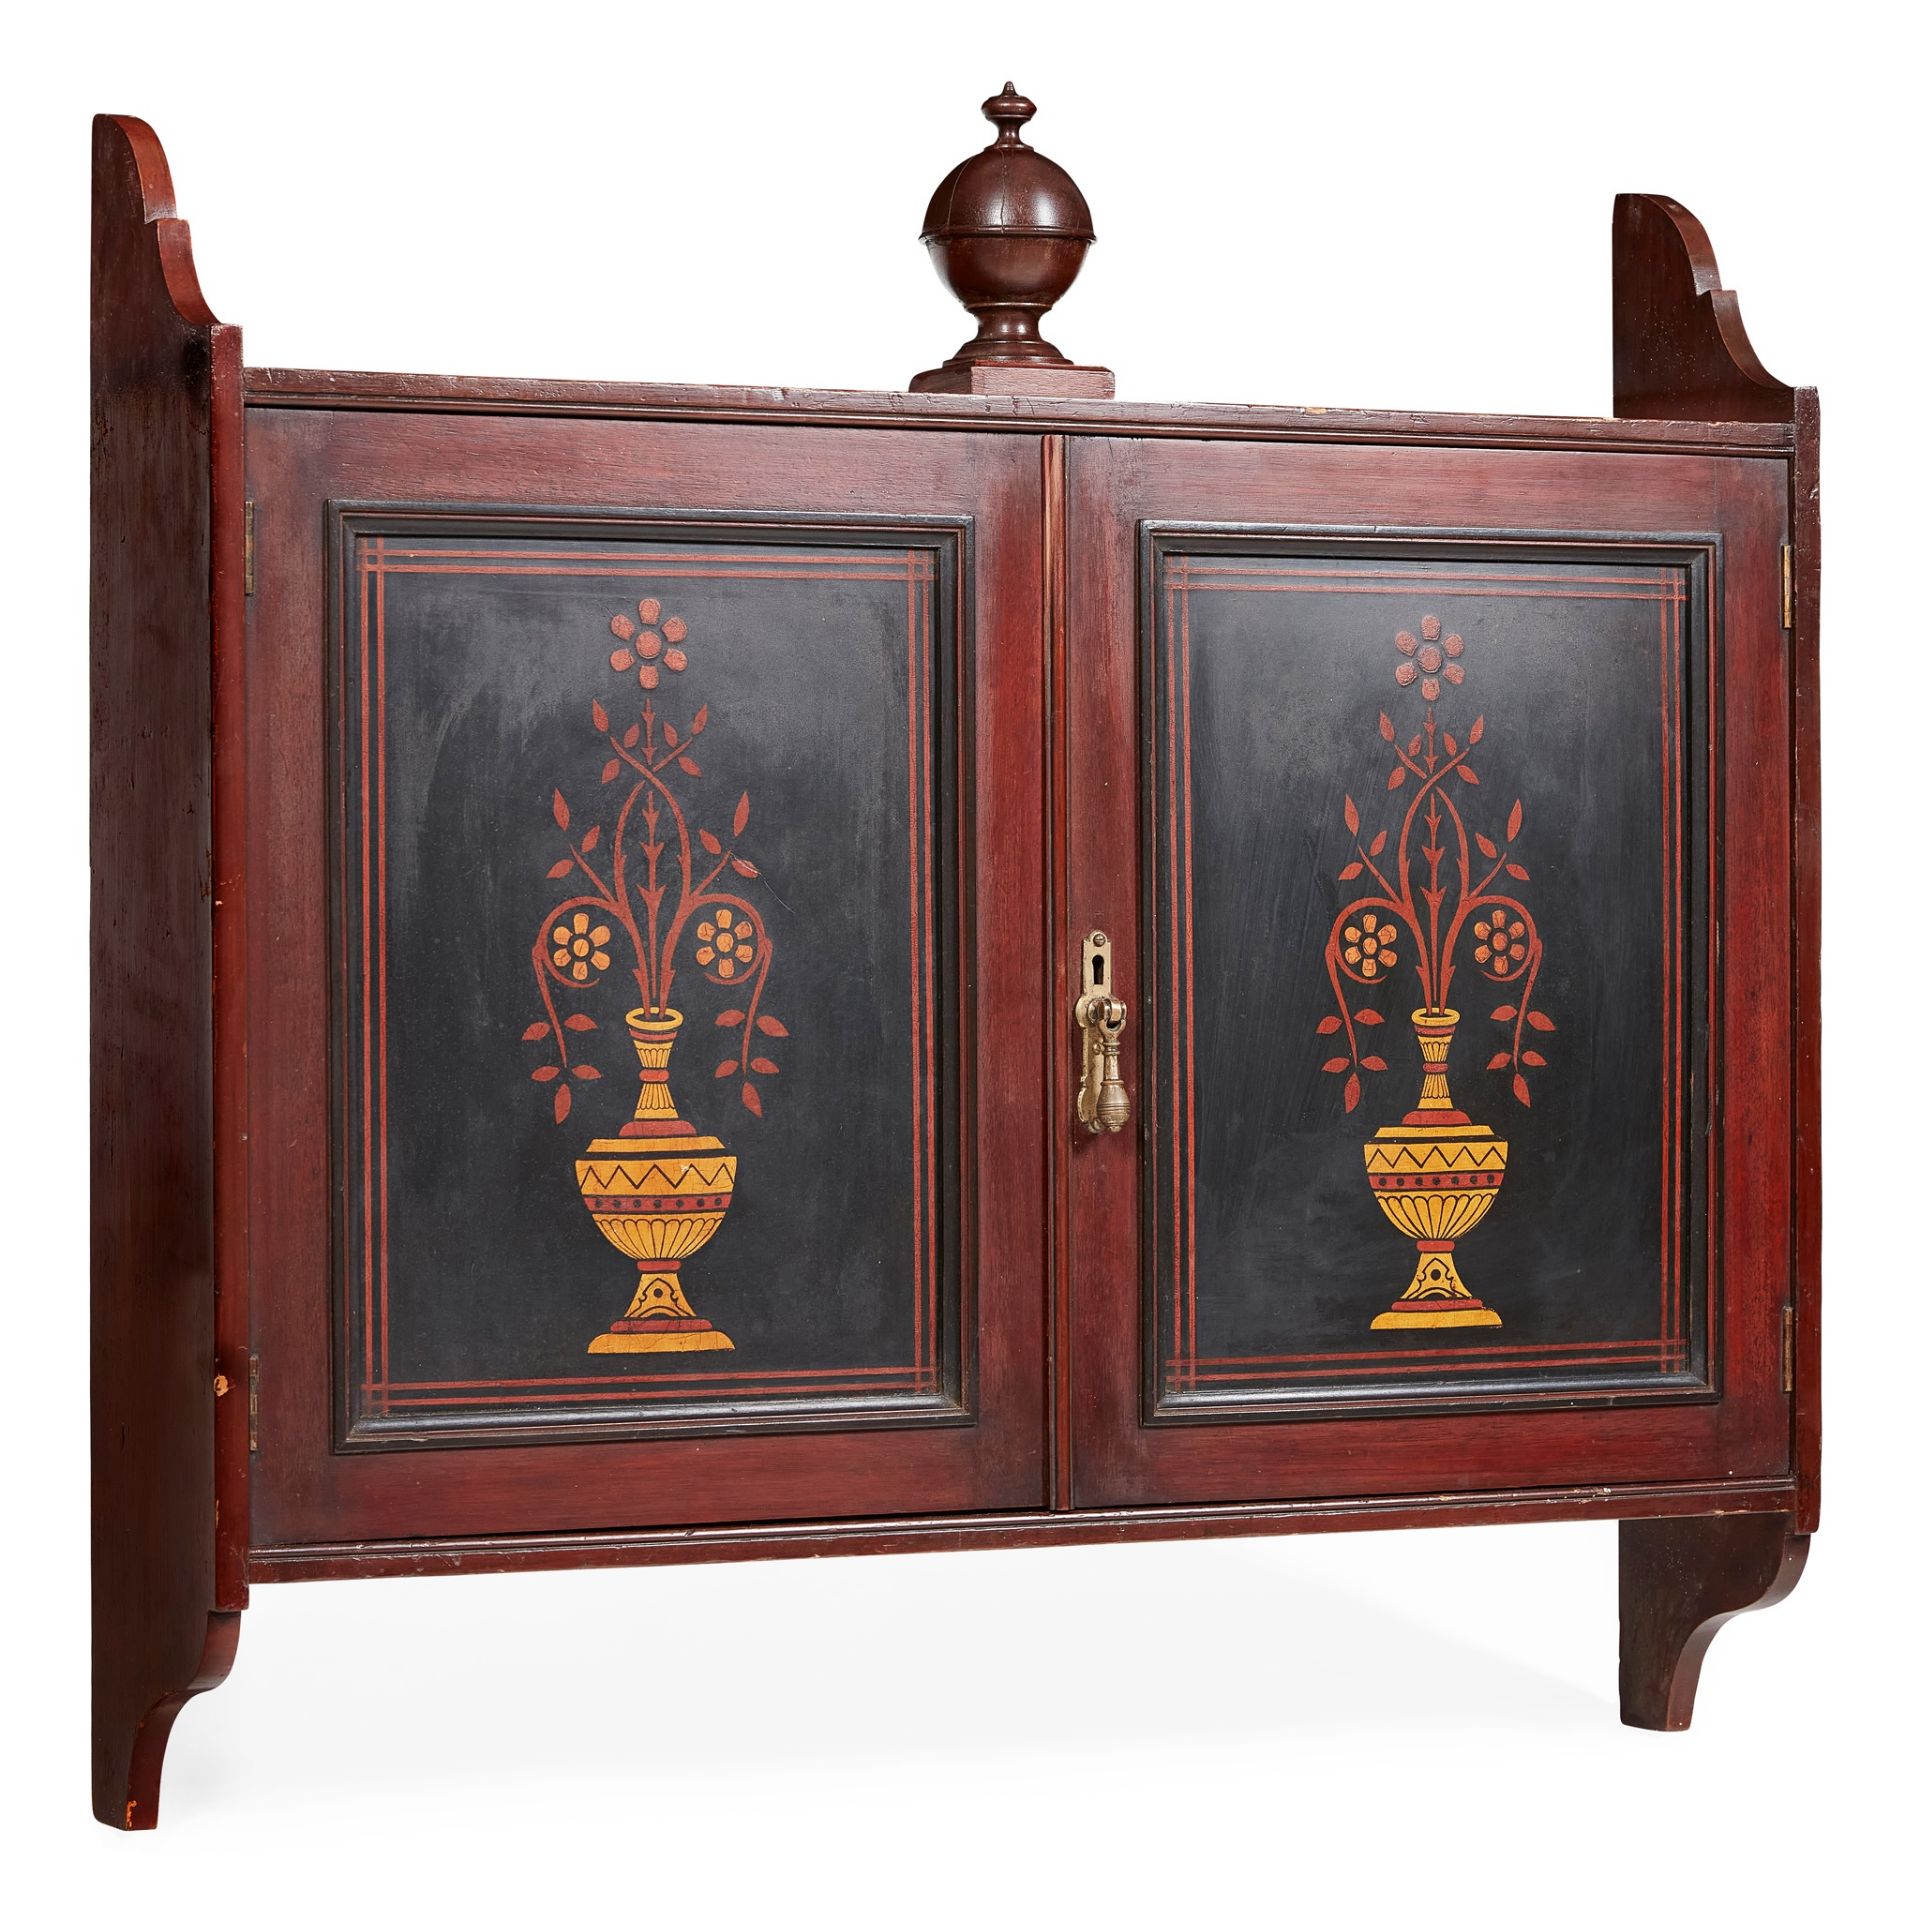 MANNER OF COTTIER & CO. AESTHETIC MOVEMENT WALL CABINET, CIRCA 1890 - Bild 2 aus 2